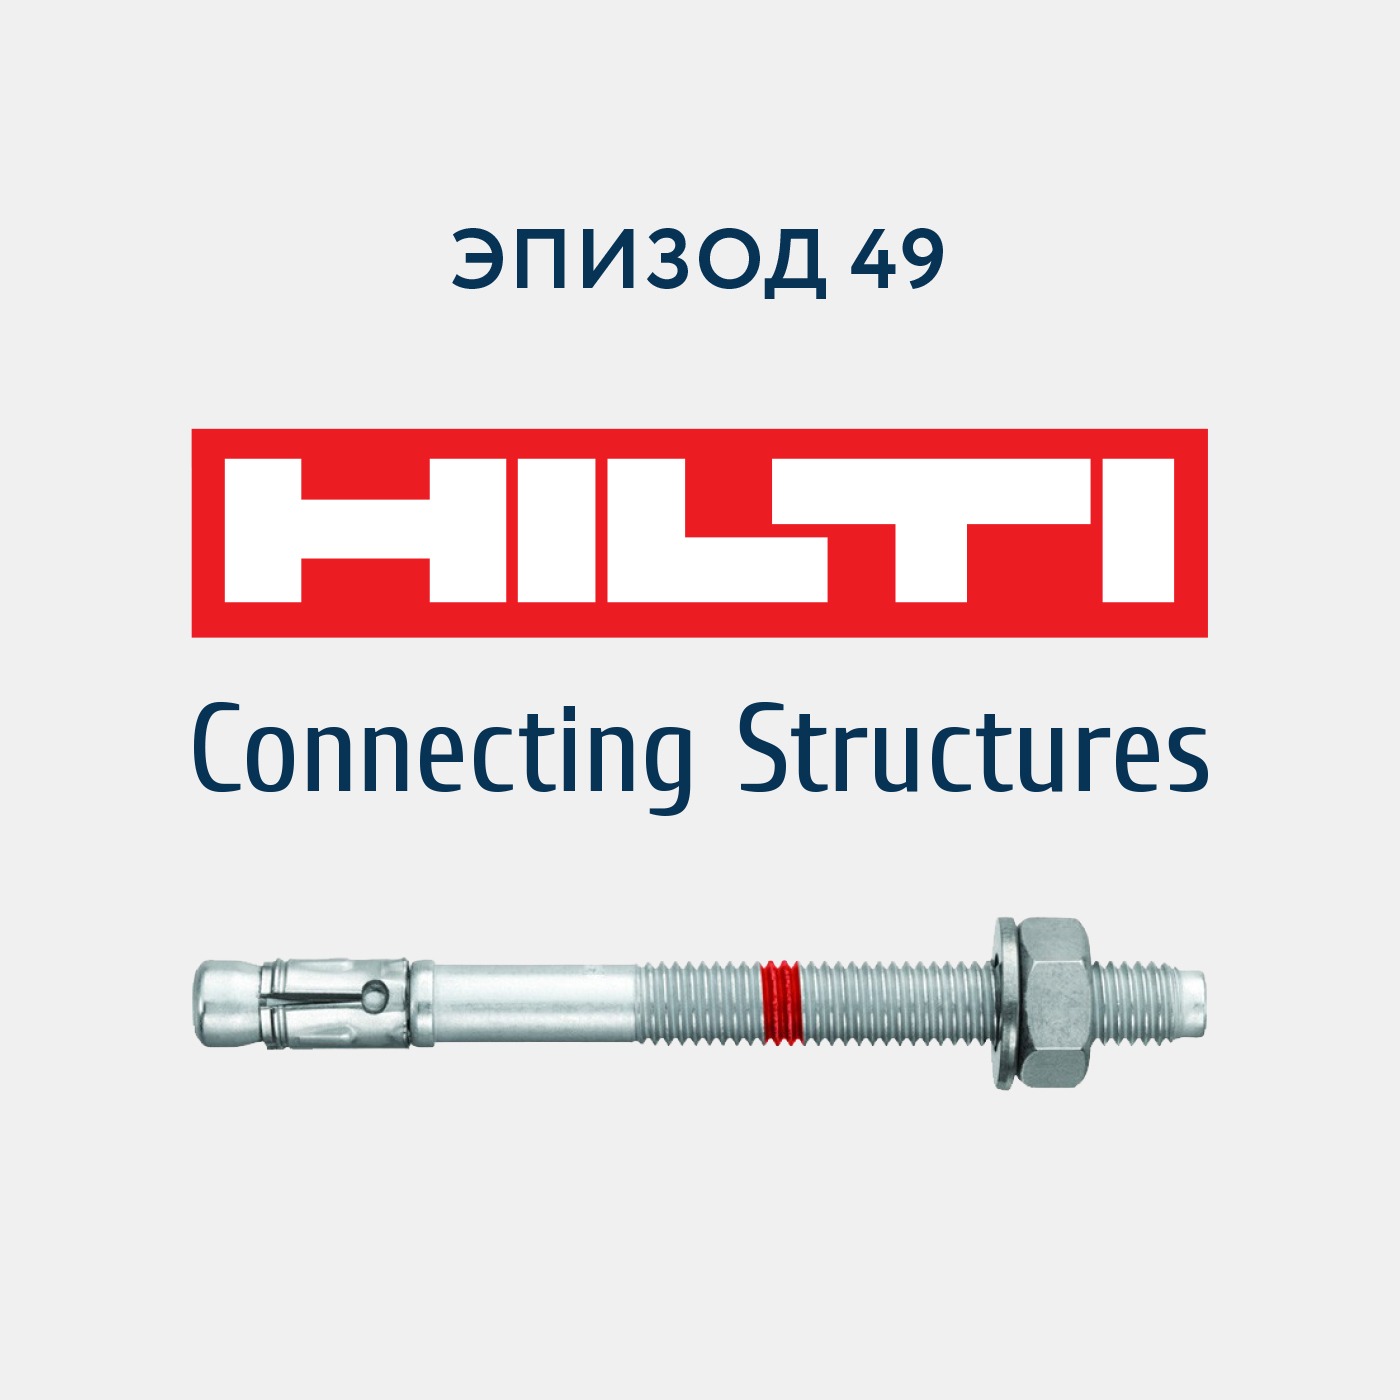 49 - Hilti. Connecting Structures